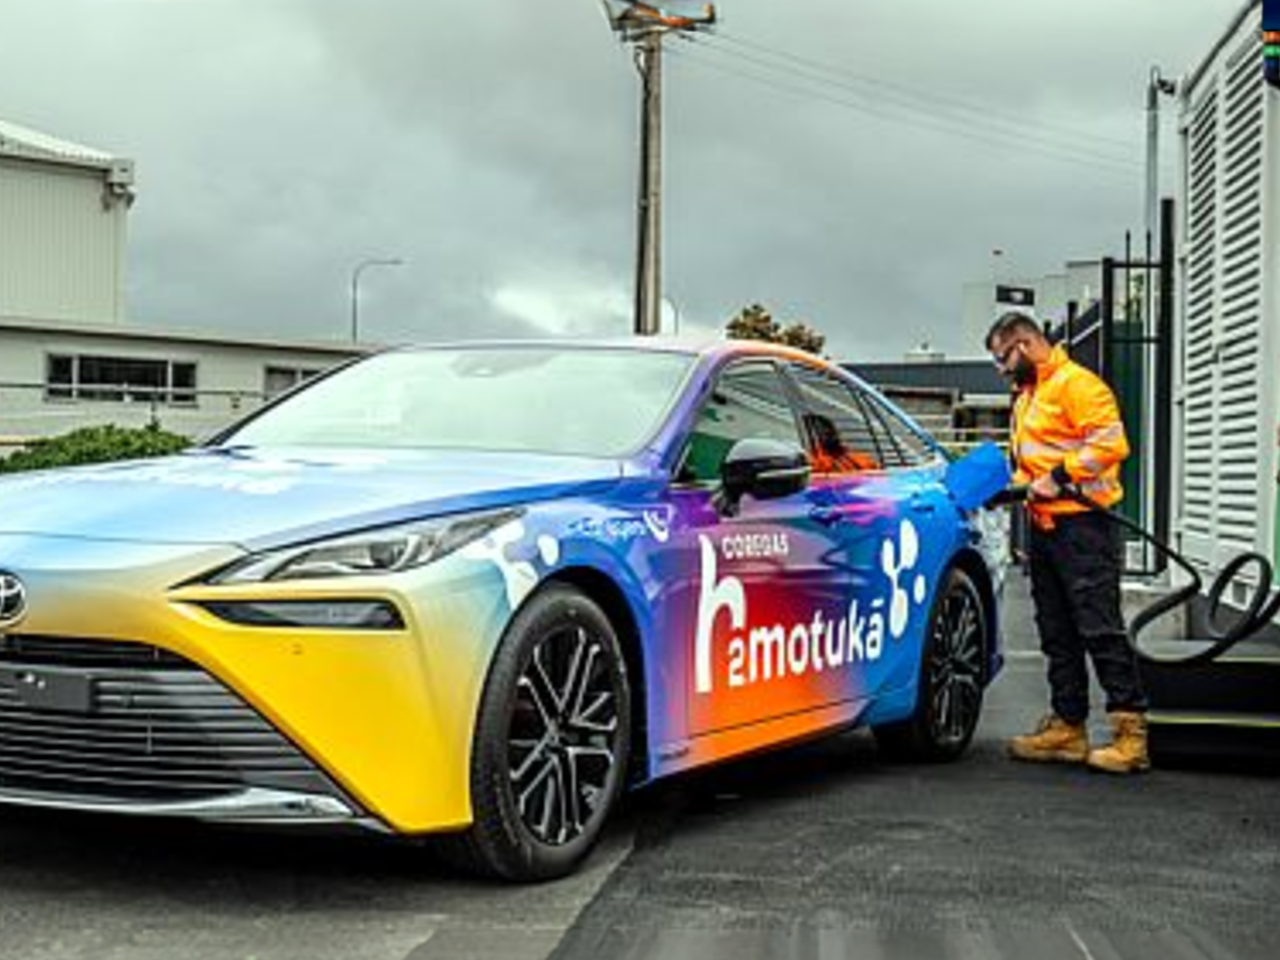 New Zealand's First Green Hydrogen Refuelling Station for Heavy Vehicles Opens in Manukau